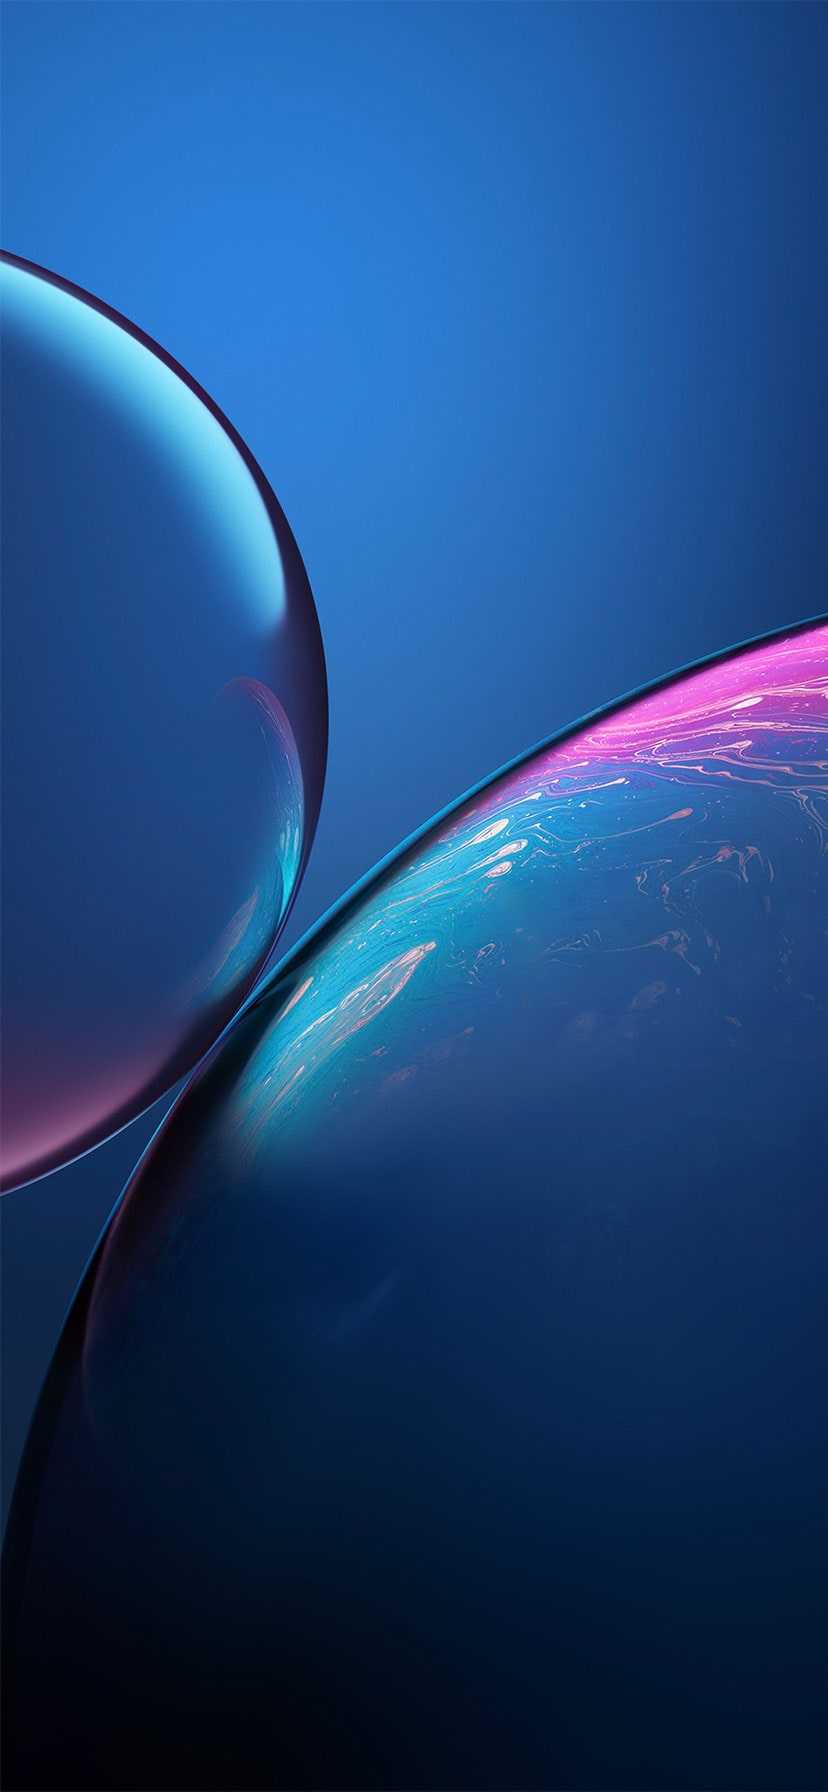 iPhone XR Wallpaper - NawPic